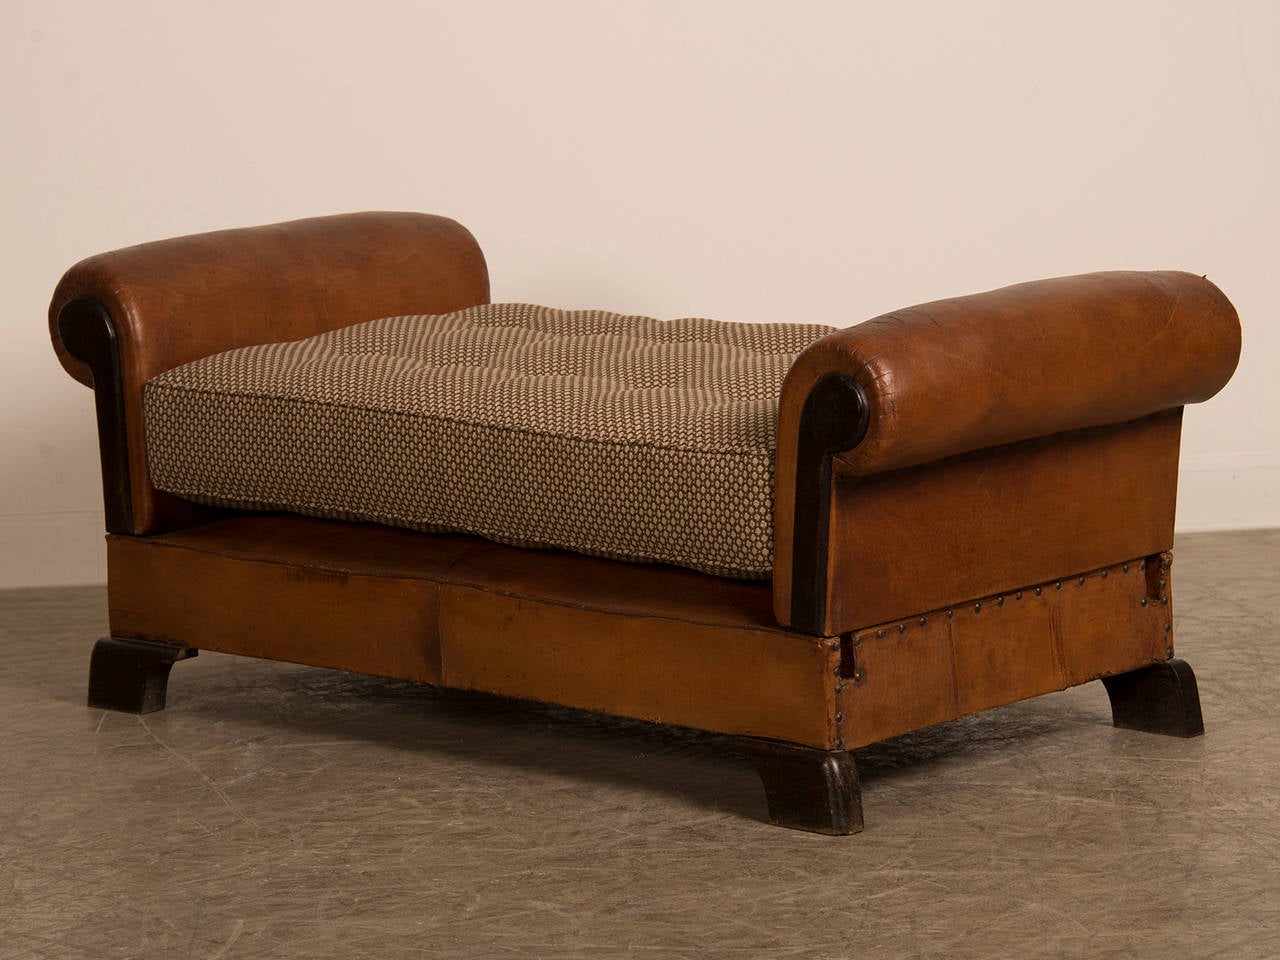 French Art Deco Leather Day Bed, France circa 1930